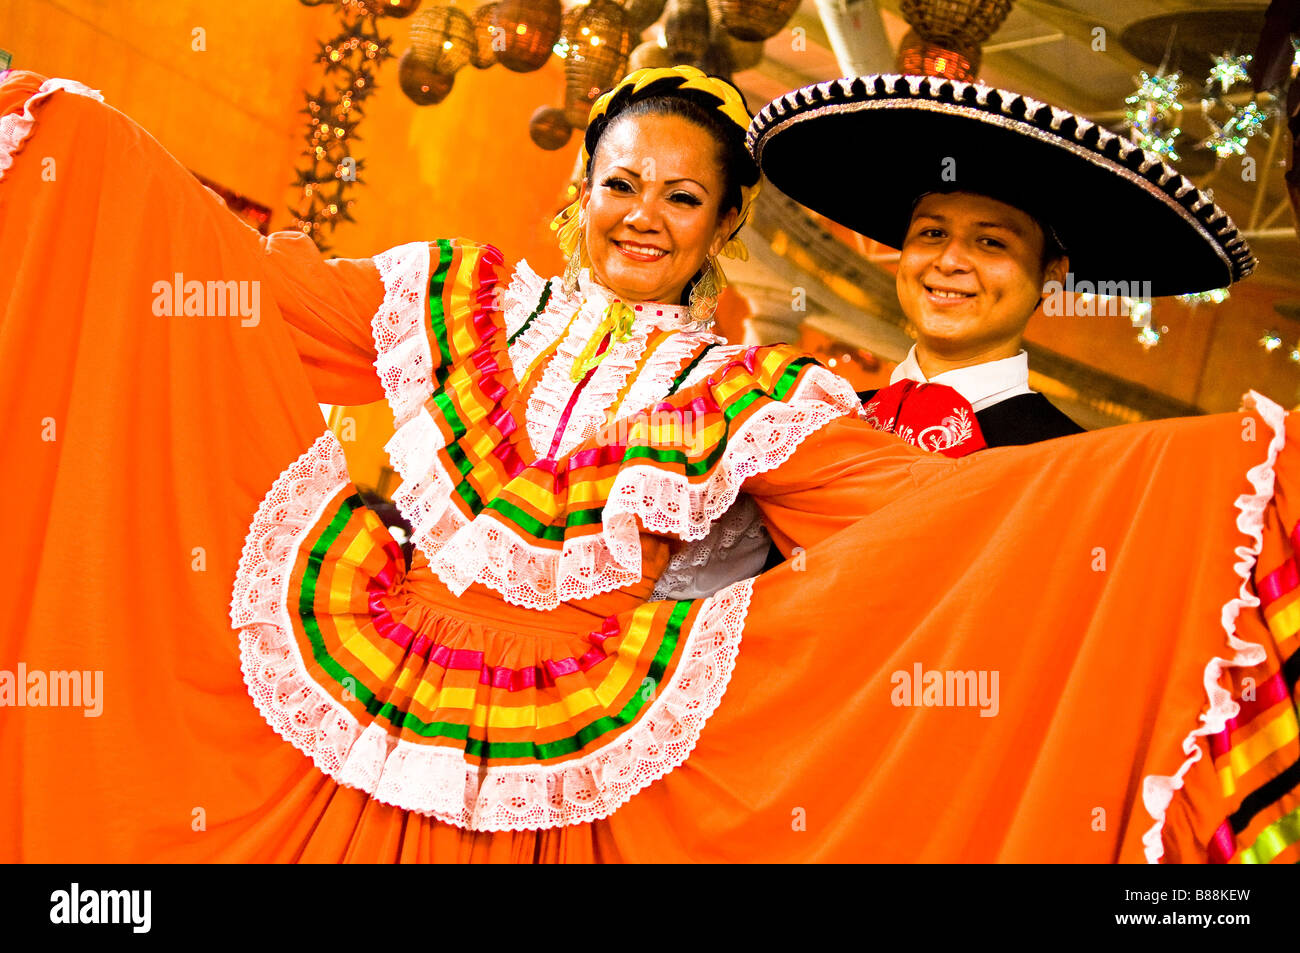 Couple in traditional costume of Jalisco at the Spectaculare folkloric show in Mazatlan Mexico Stock Photo